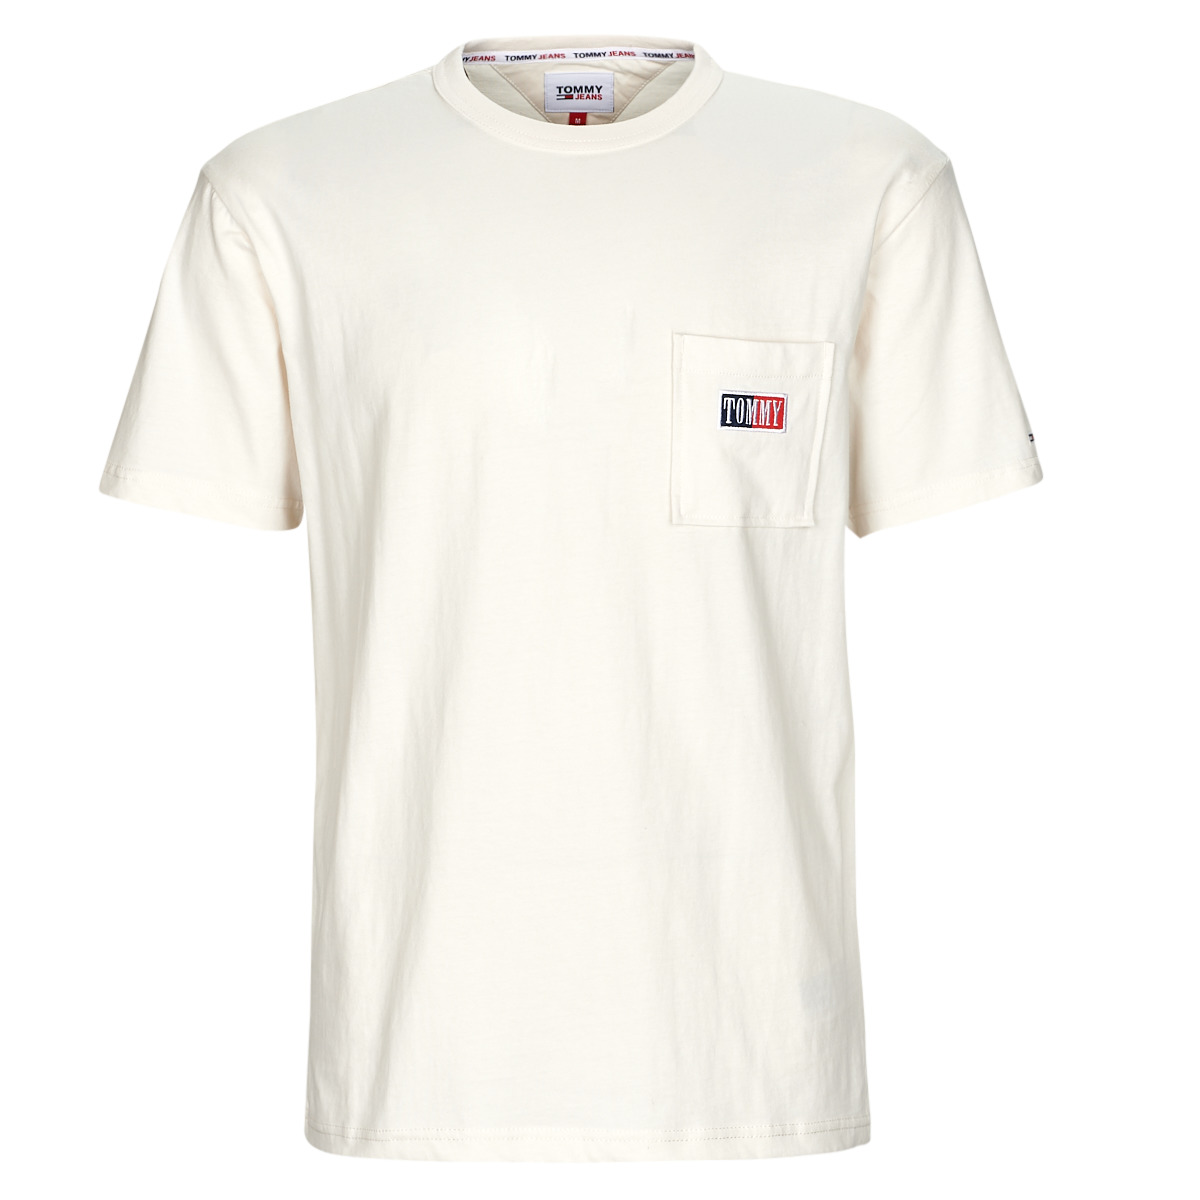 TIMELESS - - Tommy Jeans TEE White t-shirts short-sleeved Men NET TJM Clothing | Spartoo Free ! delivery CLSC TOMMY